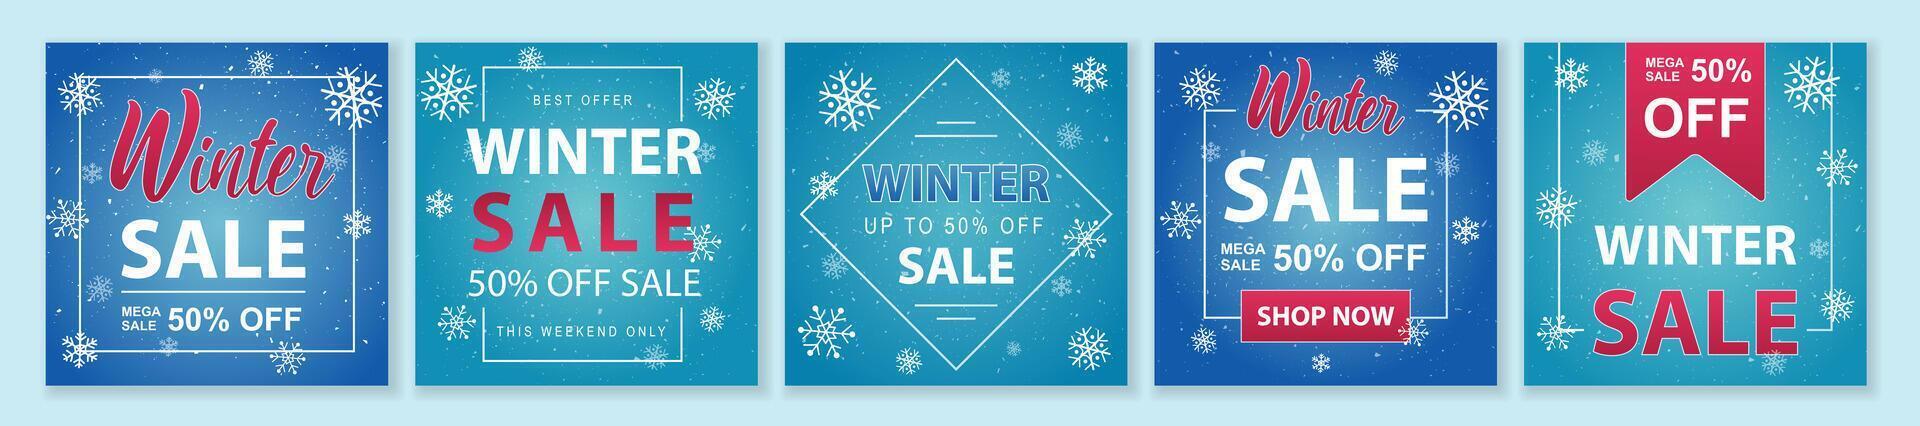 Winter and Christmas Sale square template set for ads posts in social media. Bundle of layouts with snowflakes and discounts. Suitable for mobile apps, banner design and web ads. illustration. vector